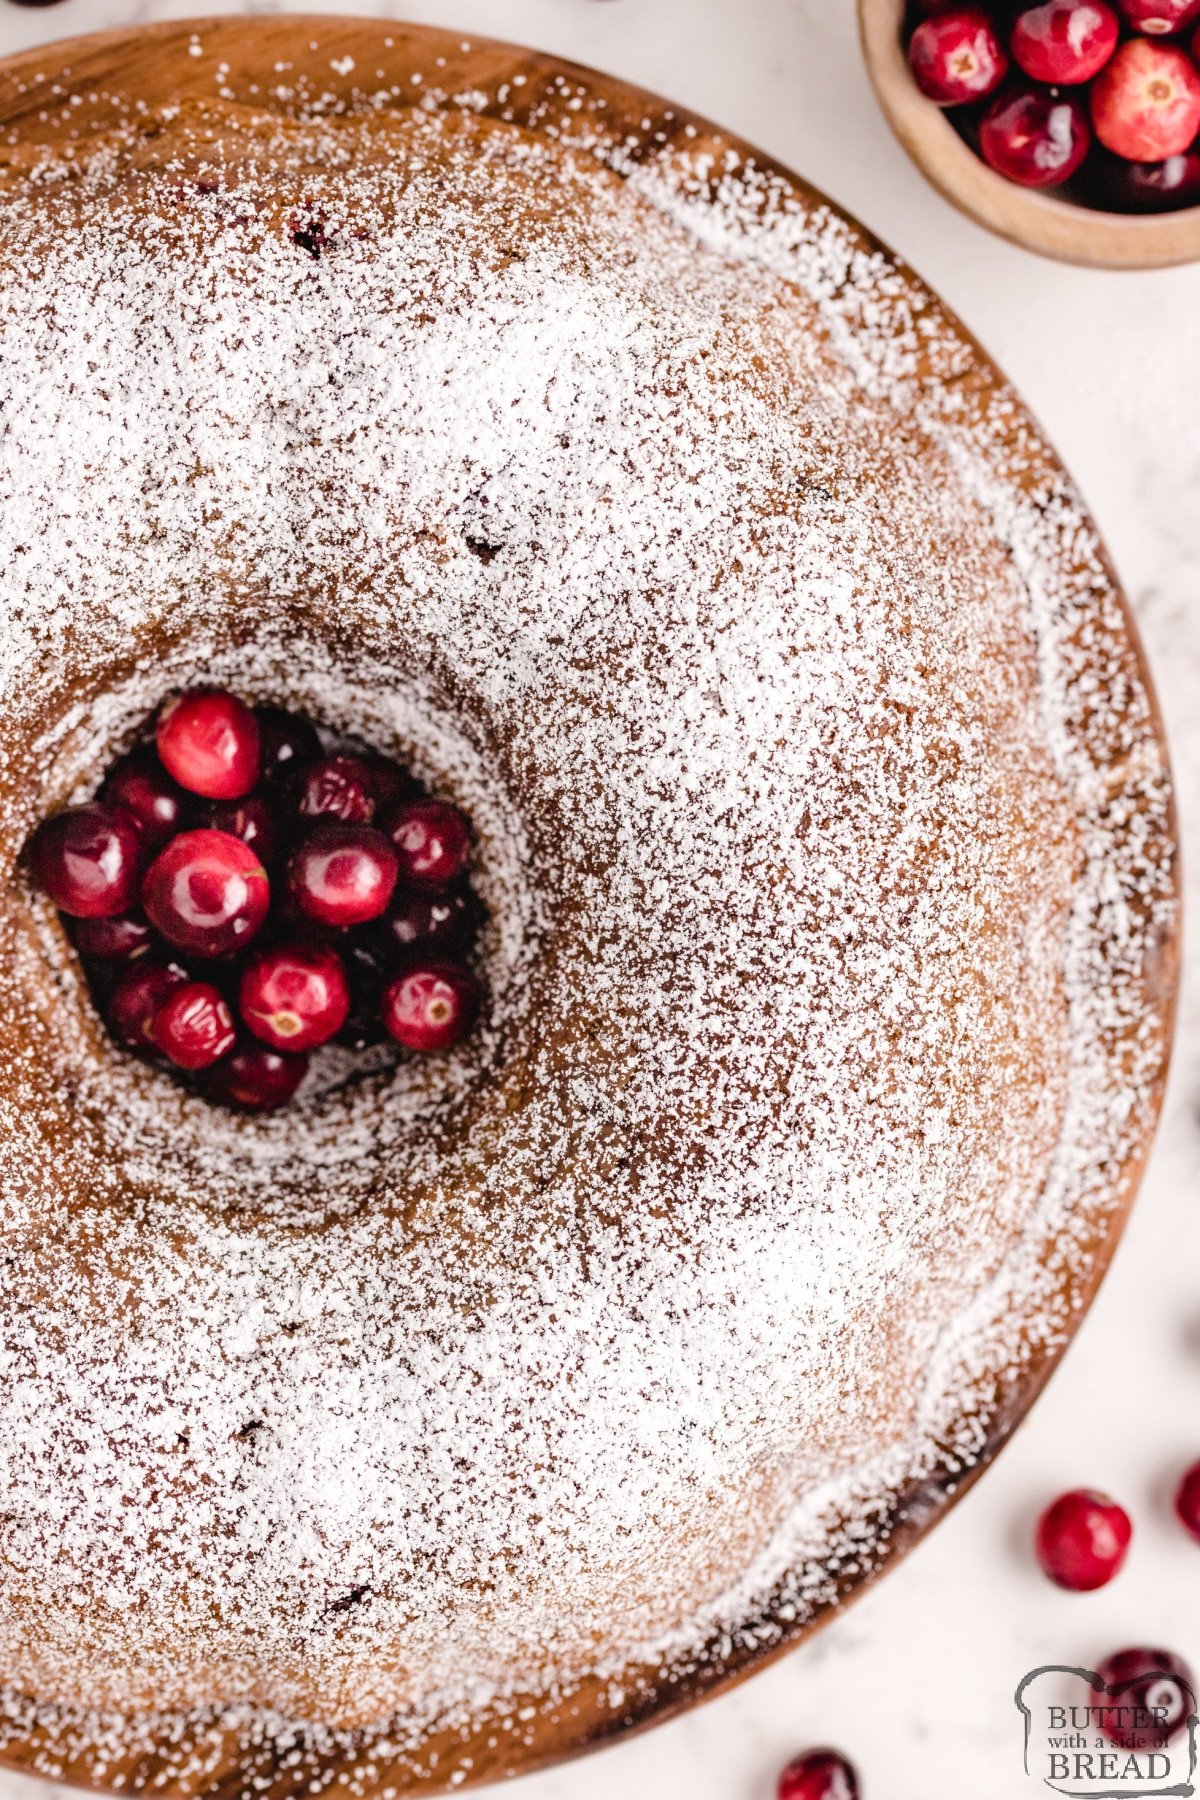 Cranberry Pumpkin Bundt Cake recipe that is made with pumpkin and fresh cranberries. Made in a bundt pan and sprinkled with powdered sugar, this delicious from scratch pumpkin cake recipe is perfect for fall! 